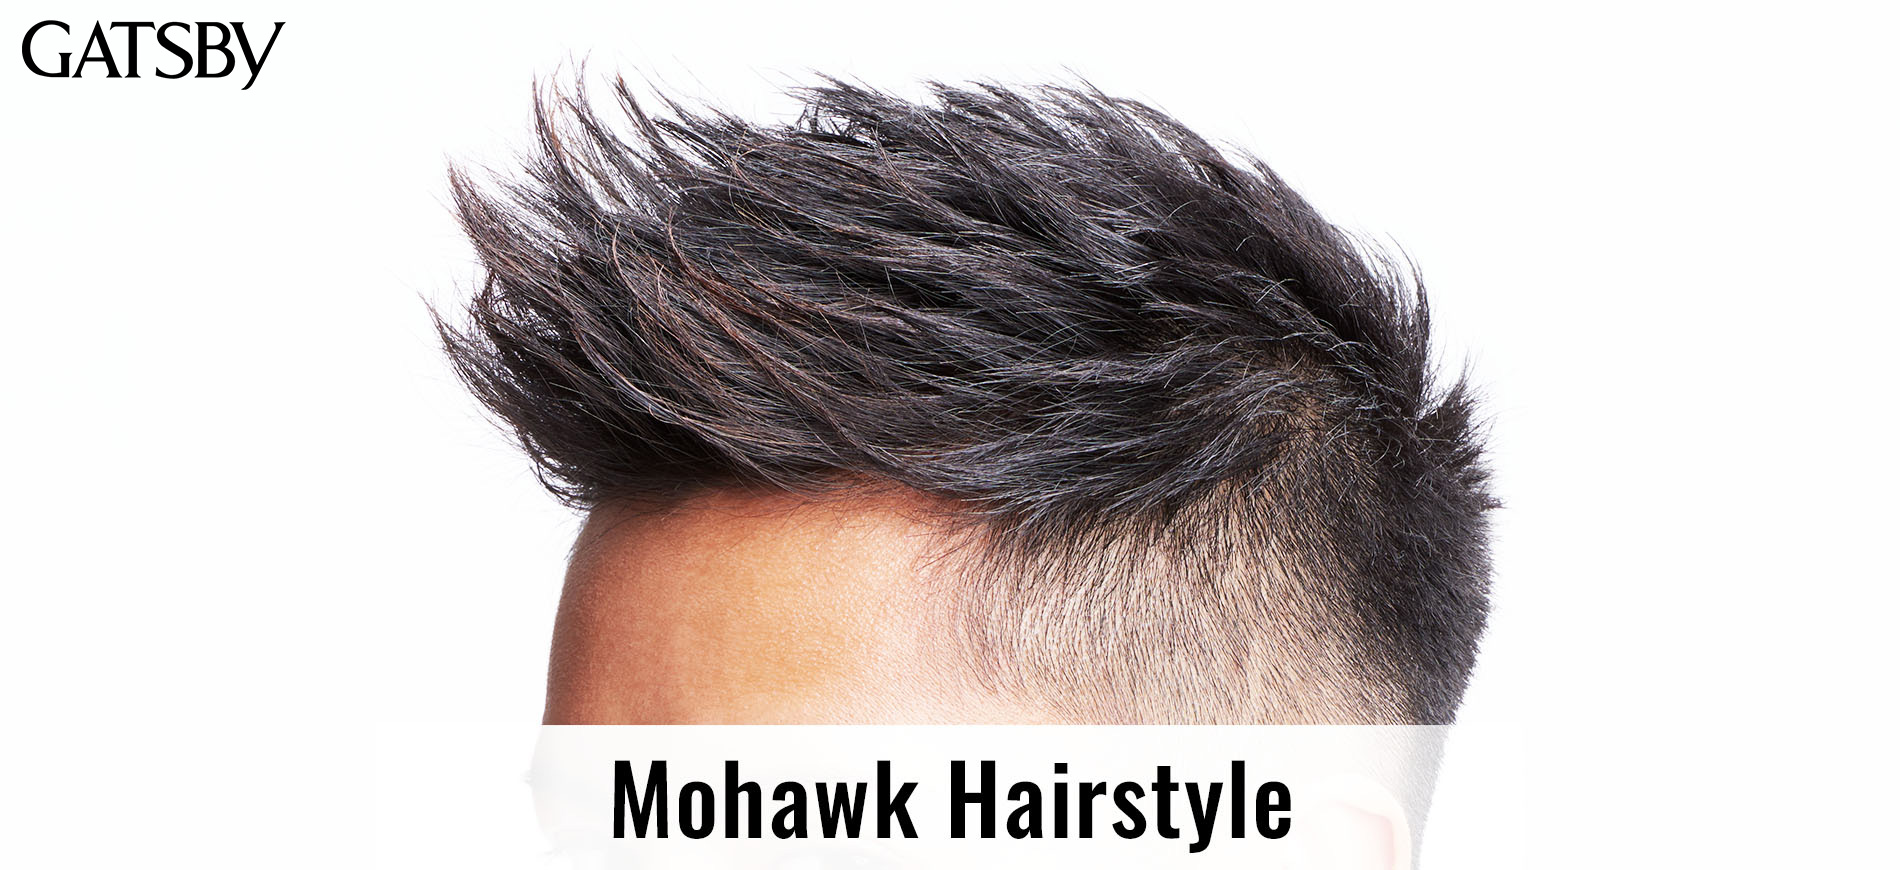 12 Mohawk Hairstyles & How to Rock It Yourself